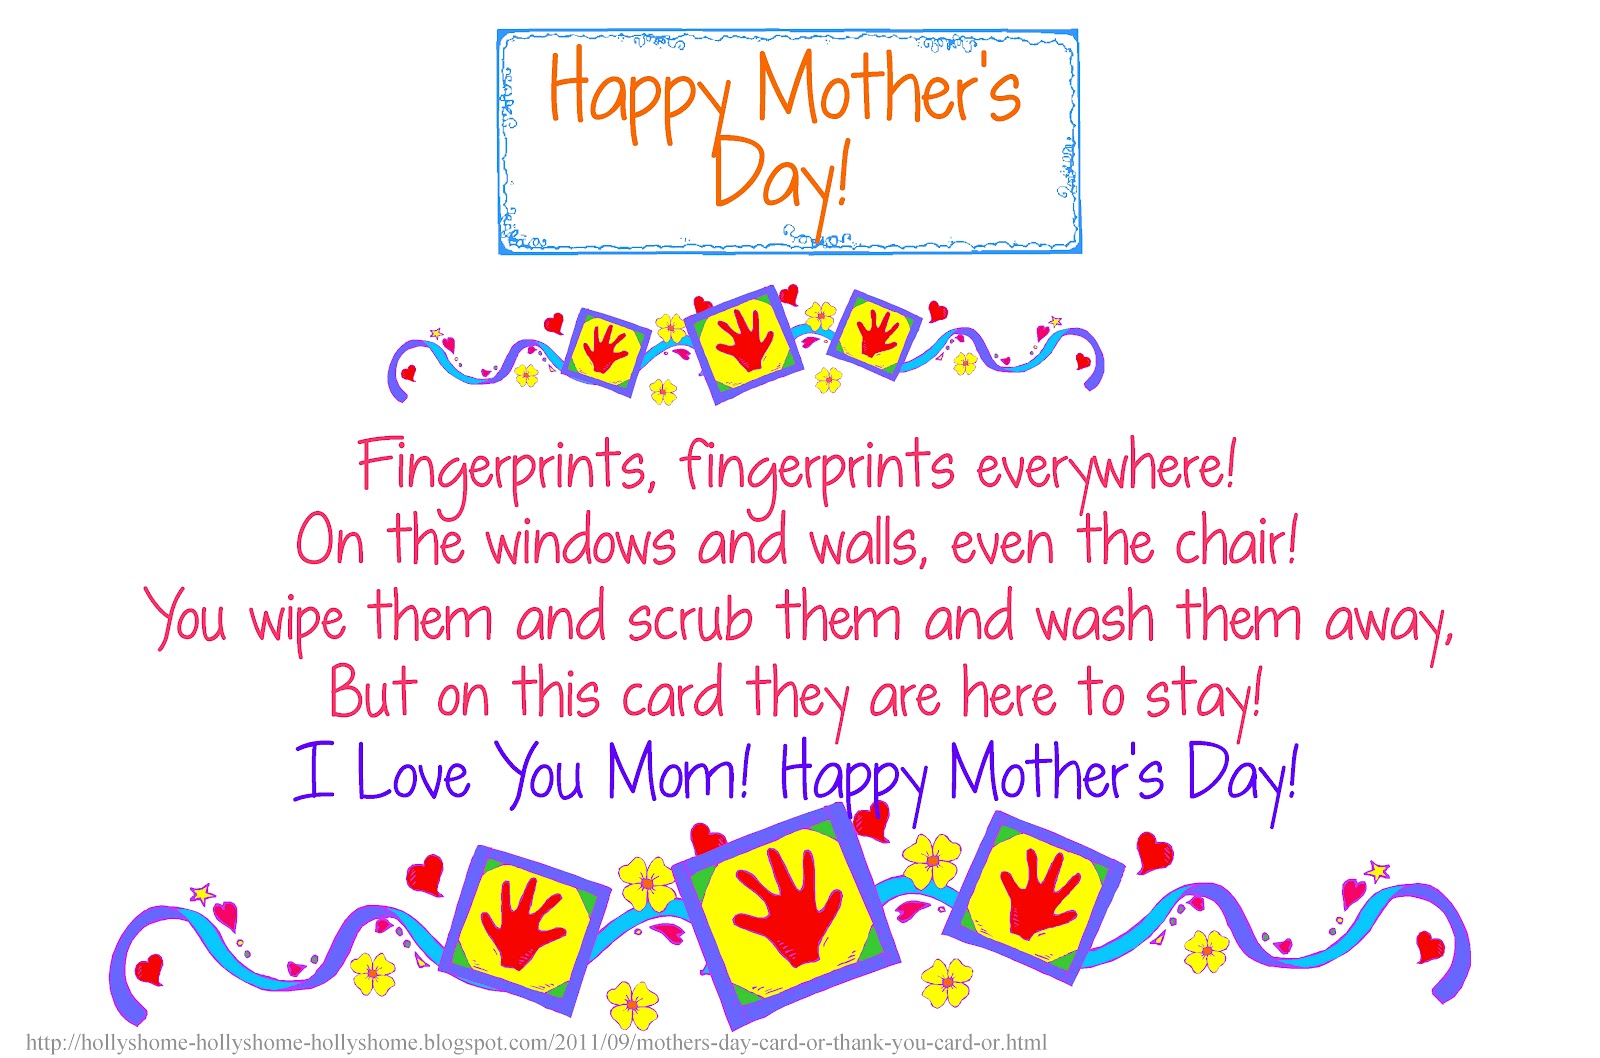 HollysHome - Church Fun: A Fingerprint Mother's Day Card (and Poem) or